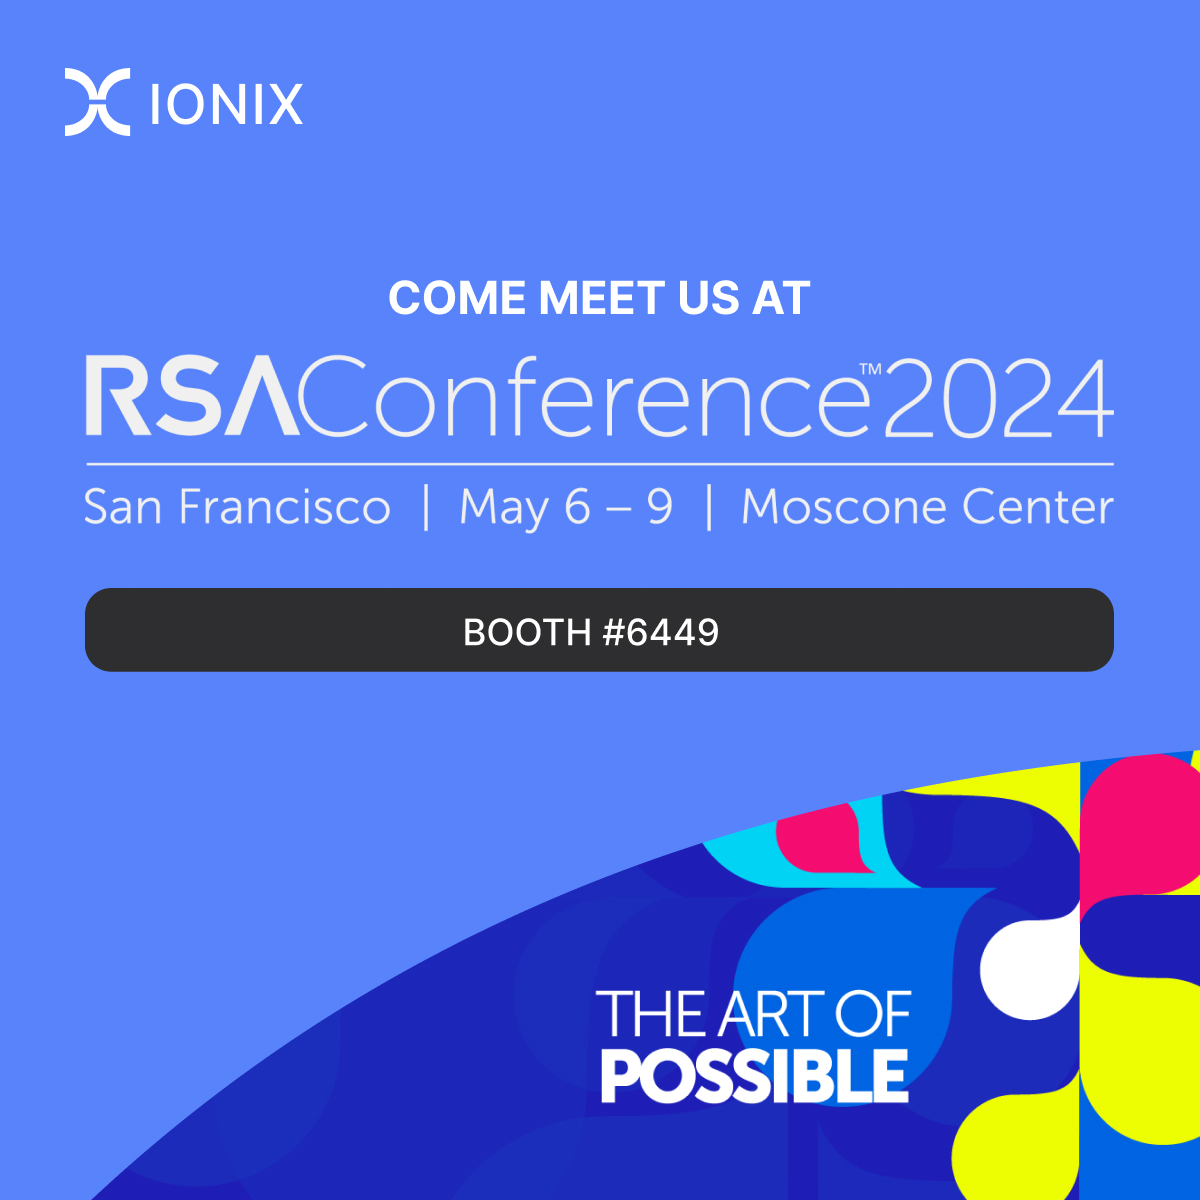 IONIX are heading to Cali for the #RSAConference2024! 🥳

4 weeks to go and our team are already gearing up to show you what IONIX can do! 

Get prepared to be amazed! See you soon!